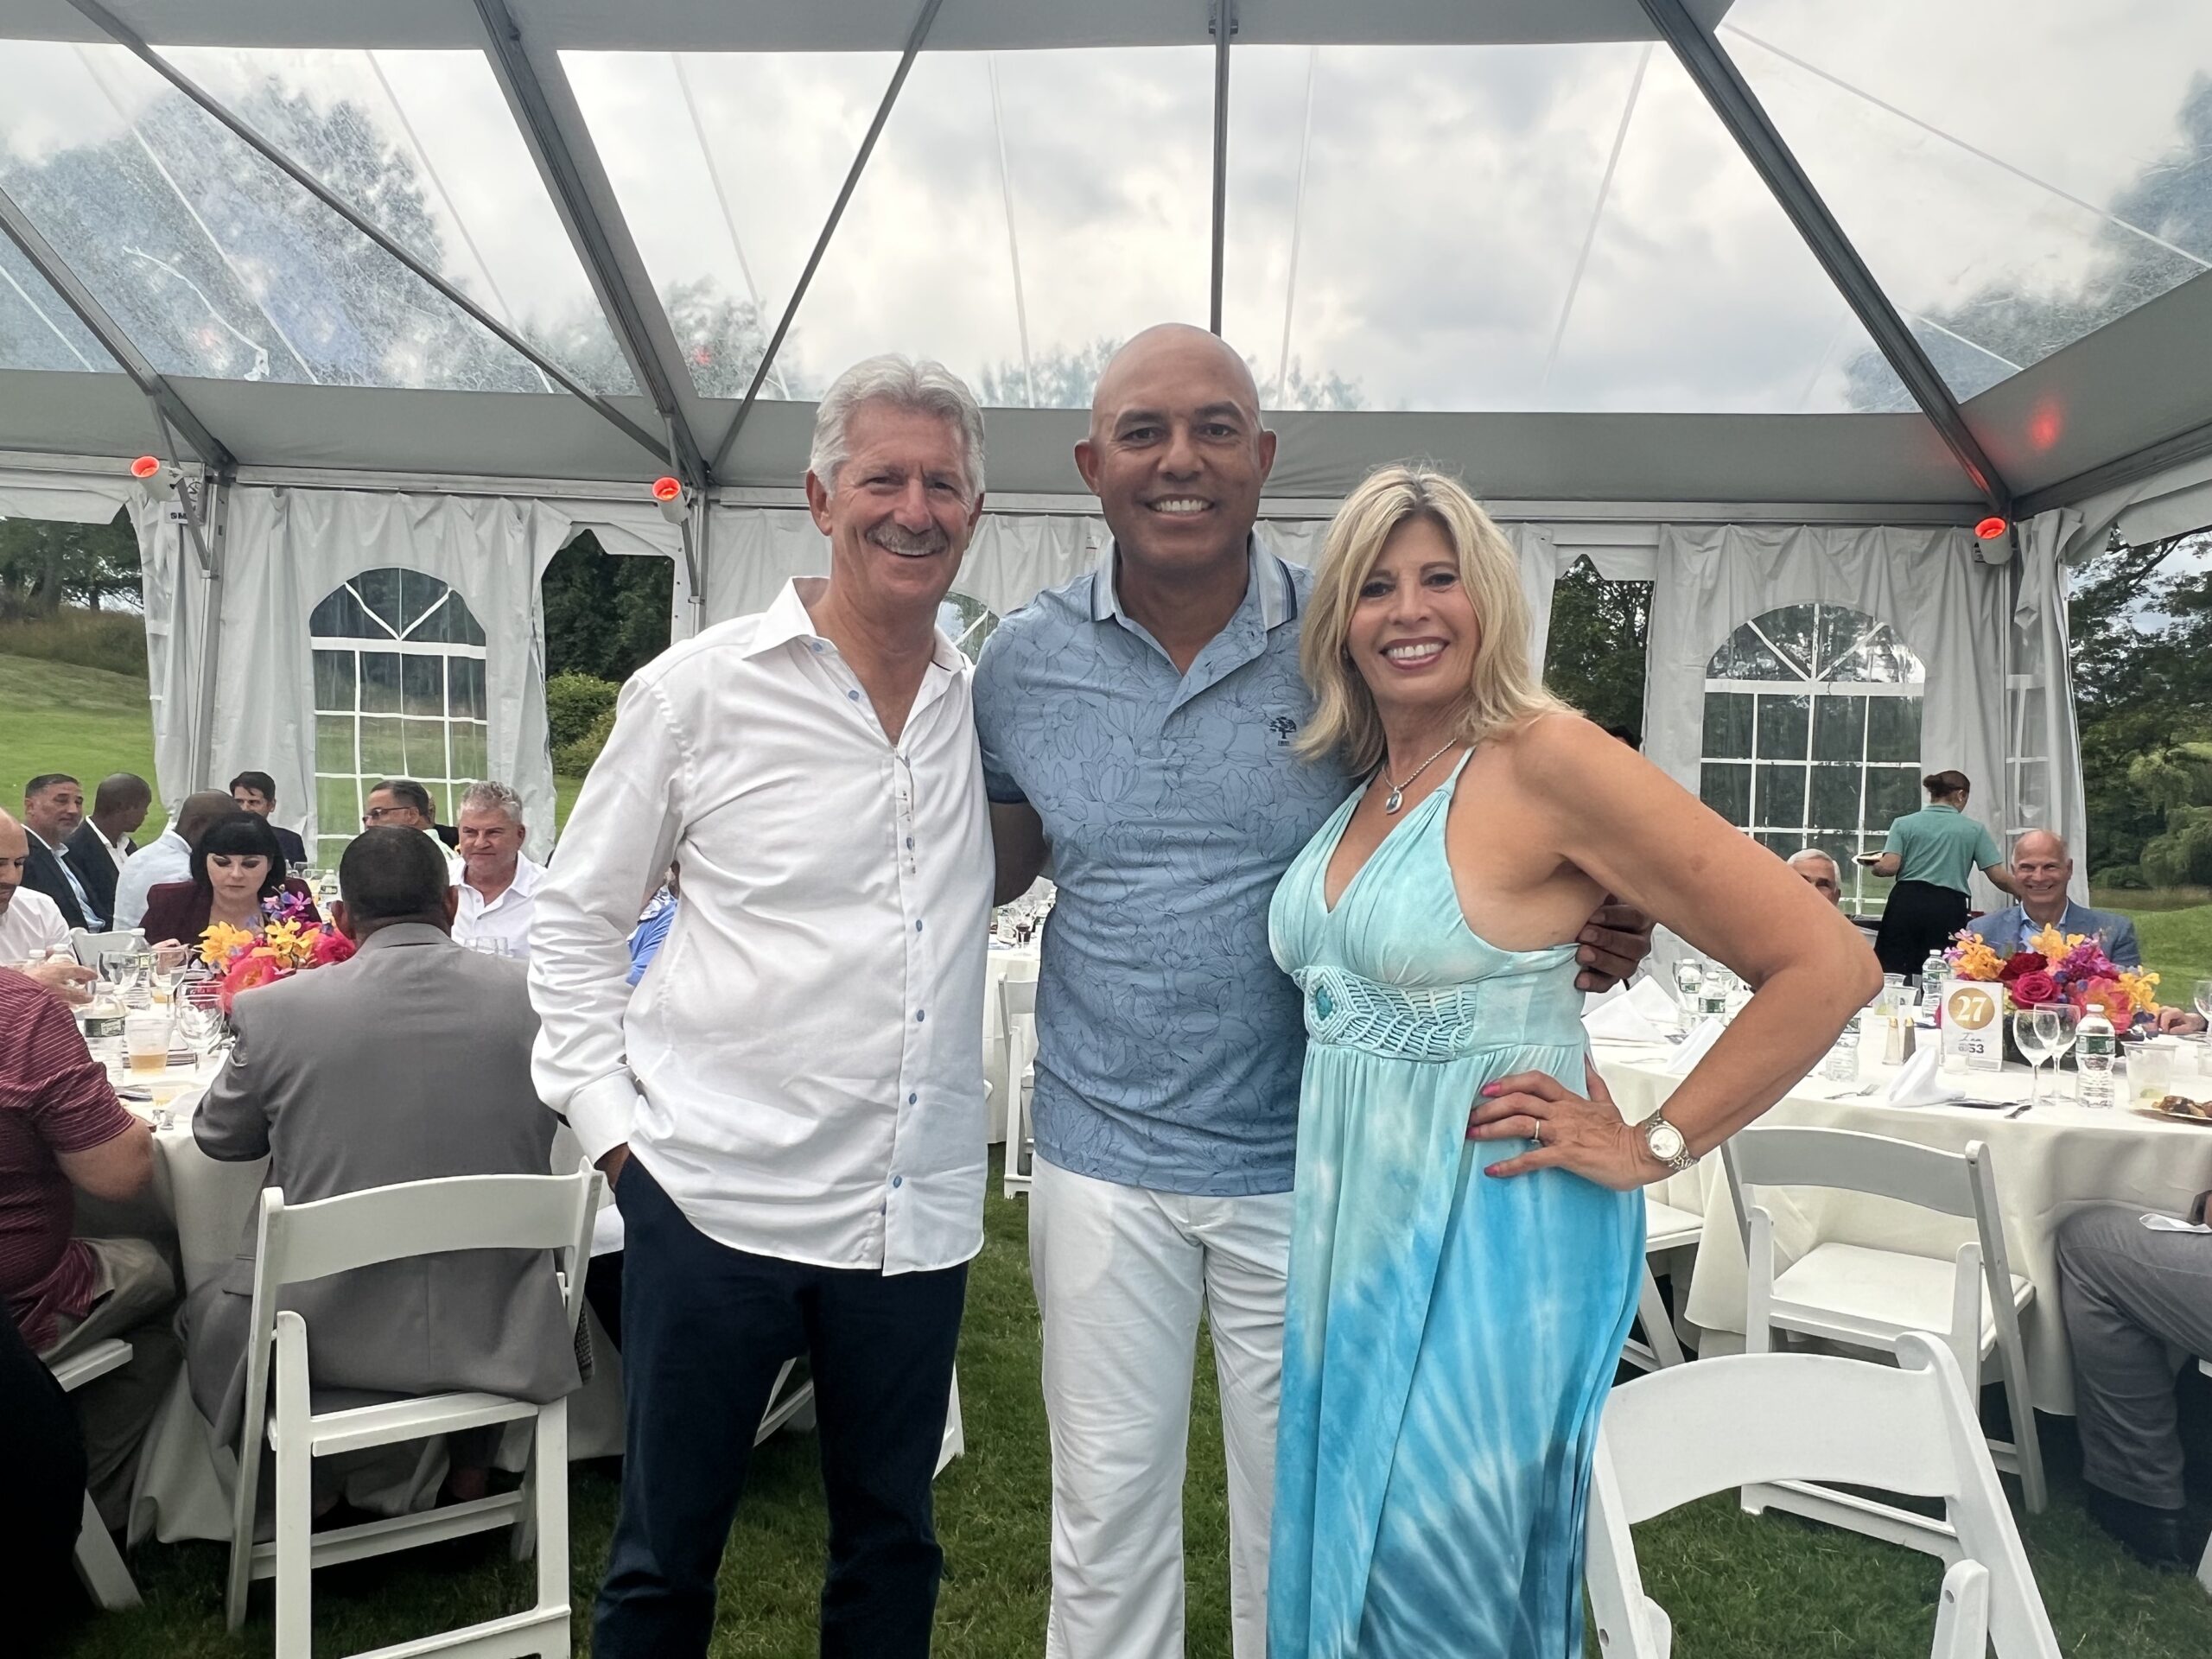 Mariano Rivera Foundation Annual Golf Outing Raises Funds for a Great Cause